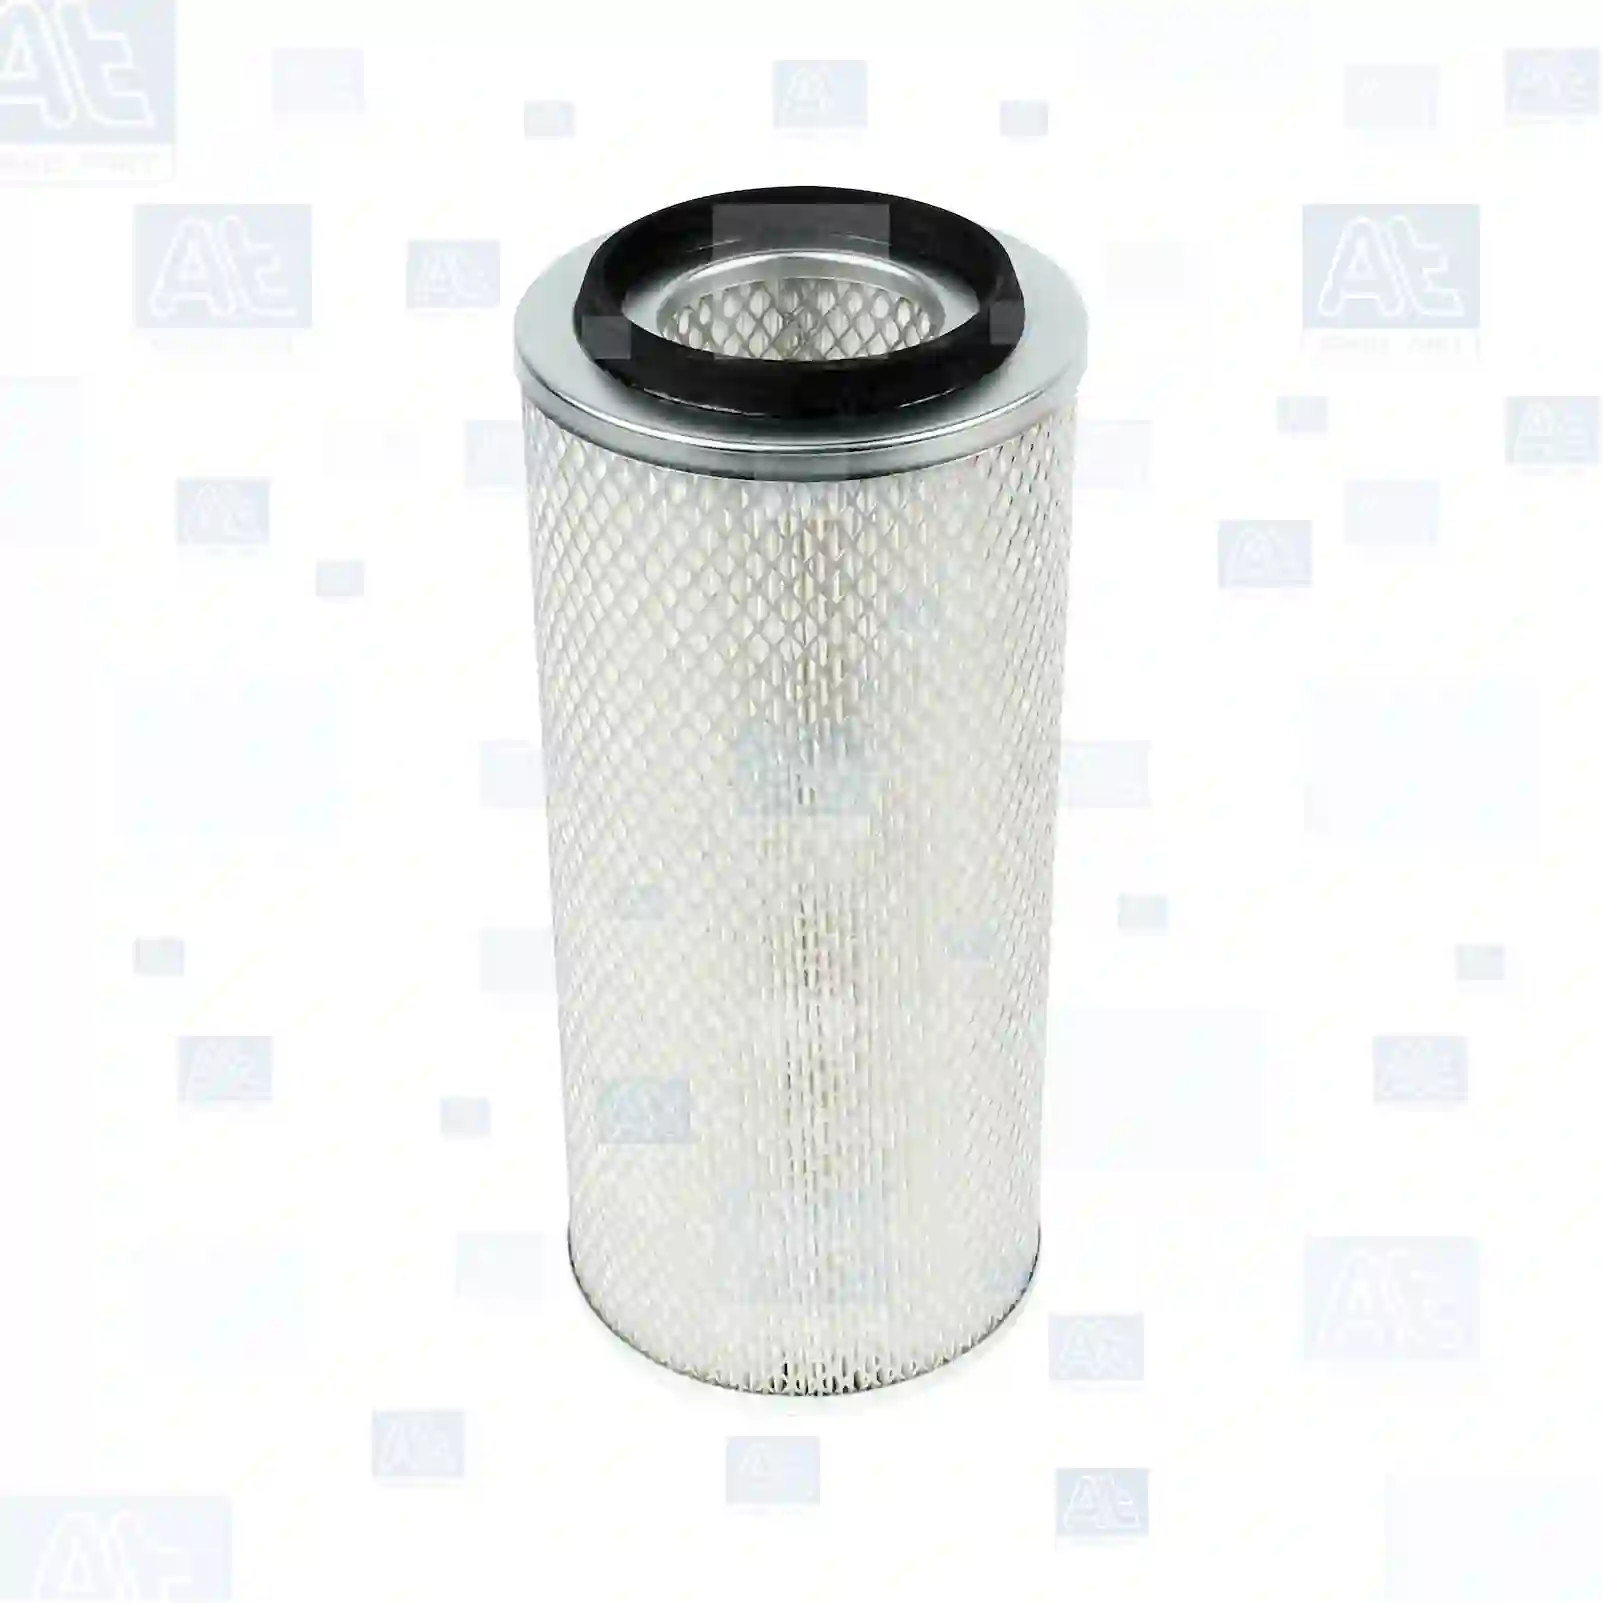 Air filter, at no 77706193, oem no: 6006001345009, T06129620, 145412A1, 3146576, 3146576R1, 3I-0837, 9974133, 10948204, 20943404, 0007235610, 0007235611, 1500199, 691733, BBU6549, 07330074, 687745, 68774500, 956591, 95659100, 01902101, 02165038, 02165039, 1111401910300, 1210602017700, 905412970014, 27059900, 634479, 5106022072, 1111401910300, 1210602017700, 2165039, 0746725, 2165039, F178200090010, G178200090010, 9839014, 01902101, 01902121, 01904581, 02165038, 02165039, 09927846, 09985779, Y05767209, Y05769012, 5011304, 5011314, 5011547, 90137364, 9974133, 9059547, 93240236, 9974133, 0009839014, 2954346M1, 3146576R1, 00634479, 01902101, 01902121, 01904581, 02165038, 02165039, 09927846, 09985779, 1902101, 1904581, 2165039, 42553200, 500038758, 503471098, 75204063, 9927846, 9985779, AZ18968, 02165038, 02165039, 0009930706, LA913, 35873-1121-1, 5106180, 7002403, 04516555224, 04516592304, 1887575M91, 2710804, 2954346M1, 0010948204, 0020943404, 0030943204, 0040948004, 8319130156, 3146576R1, 16546-G9601, 842284, 634479, 931465576R1, 93146576R1, 2710804M1, 250590, F0250590, F250590, 41185190010, 905412970014, 0003563570, 5430028794, 6005019673, R804, 5106180, BBU6549, 8319130156, SA6028, 141185190010, 41105190703, 41185190010, 44185190010, 27059900, 17700-98004, 17700-98005, 17811-98003, 16546G9601, 800619, 82640300, CH12231, T06129620, ZG00863-0008 At Spare Part | Engine, Accelerator Pedal, Camshaft, Connecting Rod, Crankcase, Crankshaft, Cylinder Head, Engine Suspension Mountings, Exhaust Manifold, Exhaust Gas Recirculation, Filter Kits, Flywheel Housing, General Overhaul Kits, Engine, Intake Manifold, Oil Cleaner, Oil Cooler, Oil Filter, Oil Pump, Oil Sump, Piston & Liner, Sensor & Switch, Timing Case, Turbocharger, Cooling System, Belt Tensioner, Coolant Filter, Coolant Pipe, Corrosion Prevention Agent, Drive, Expansion Tank, Fan, Intercooler, Monitors & Gauges, Radiator, Thermostat, V-Belt / Timing belt, Water Pump, Fuel System, Electronical Injector Unit, Feed Pump, Fuel Filter, cpl., Fuel Gauge Sender,  Fuel Line, Fuel Pump, Fuel Tank, Injection Line Kit, Injection Pump, Exhaust System, Clutch & Pedal, Gearbox, Propeller Shaft, Axles, Brake System, Hubs & Wheels, Suspension, Leaf Spring, Universal Parts / Accessories, Steering, Electrical System, Cabin Air filter, at no 77706193, oem no: 6006001345009, T06129620, 145412A1, 3146576, 3146576R1, 3I-0837, 9974133, 10948204, 20943404, 0007235610, 0007235611, 1500199, 691733, BBU6549, 07330074, 687745, 68774500, 956591, 95659100, 01902101, 02165038, 02165039, 1111401910300, 1210602017700, 905412970014, 27059900, 634479, 5106022072, 1111401910300, 1210602017700, 2165039, 0746725, 2165039, F178200090010, G178200090010, 9839014, 01902101, 01902121, 01904581, 02165038, 02165039, 09927846, 09985779, Y05767209, Y05769012, 5011304, 5011314, 5011547, 90137364, 9974133, 9059547, 93240236, 9974133, 0009839014, 2954346M1, 3146576R1, 00634479, 01902101, 01902121, 01904581, 02165038, 02165039, 09927846, 09985779, 1902101, 1904581, 2165039, 42553200, 500038758, 503471098, 75204063, 9927846, 9985779, AZ18968, 02165038, 02165039, 0009930706, LA913, 35873-1121-1, 5106180, 7002403, 04516555224, 04516592304, 1887575M91, 2710804, 2954346M1, 0010948204, 0020943404, 0030943204, 0040948004, 8319130156, 3146576R1, 16546-G9601, 842284, 634479, 931465576R1, 93146576R1, 2710804M1, 250590, F0250590, F250590, 41185190010, 905412970014, 0003563570, 5430028794, 6005019673, R804, 5106180, BBU6549, 8319130156, SA6028, 141185190010, 41105190703, 41185190010, 44185190010, 27059900, 17700-98004, 17700-98005, 17811-98003, 16546G9601, 800619, 82640300, CH12231, T06129620, ZG00863-0008 At Spare Part | Engine, Accelerator Pedal, Camshaft, Connecting Rod, Crankcase, Crankshaft, Cylinder Head, Engine Suspension Mountings, Exhaust Manifold, Exhaust Gas Recirculation, Filter Kits, Flywheel Housing, General Overhaul Kits, Engine, Intake Manifold, Oil Cleaner, Oil Cooler, Oil Filter, Oil Pump, Oil Sump, Piston & Liner, Sensor & Switch, Timing Case, Turbocharger, Cooling System, Belt Tensioner, Coolant Filter, Coolant Pipe, Corrosion Prevention Agent, Drive, Expansion Tank, Fan, Intercooler, Monitors & Gauges, Radiator, Thermostat, V-Belt / Timing belt, Water Pump, Fuel System, Electronical Injector Unit, Feed Pump, Fuel Filter, cpl., Fuel Gauge Sender,  Fuel Line, Fuel Pump, Fuel Tank, Injection Line Kit, Injection Pump, Exhaust System, Clutch & Pedal, Gearbox, Propeller Shaft, Axles, Brake System, Hubs & Wheels, Suspension, Leaf Spring, Universal Parts / Accessories, Steering, Electrical System, Cabin